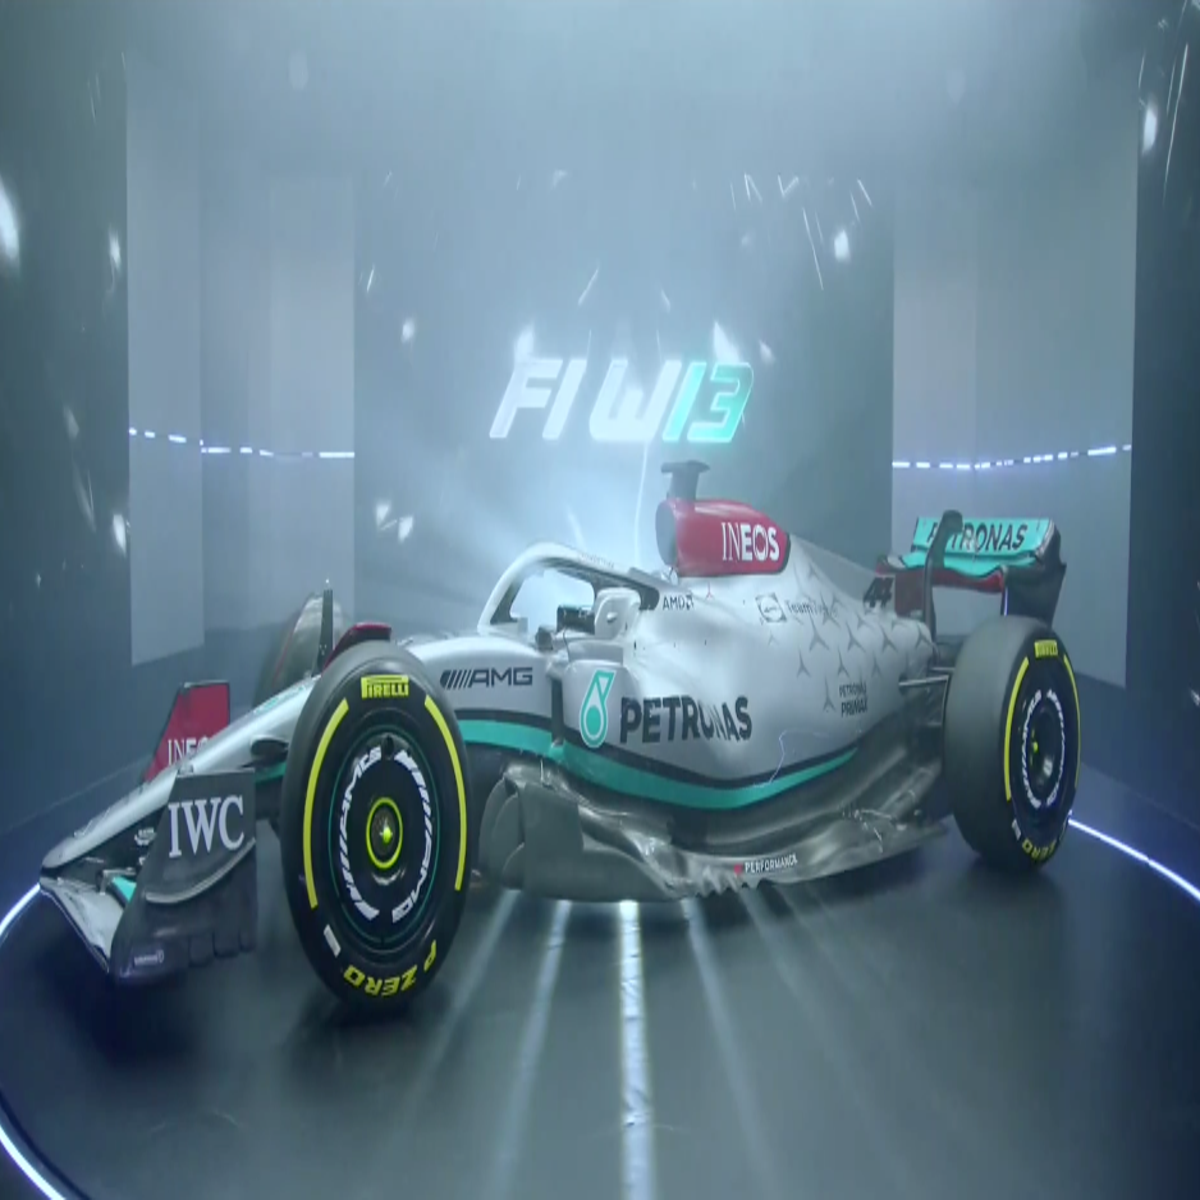 F1 car launches: Every team's new livery and full gallery for 2022 season